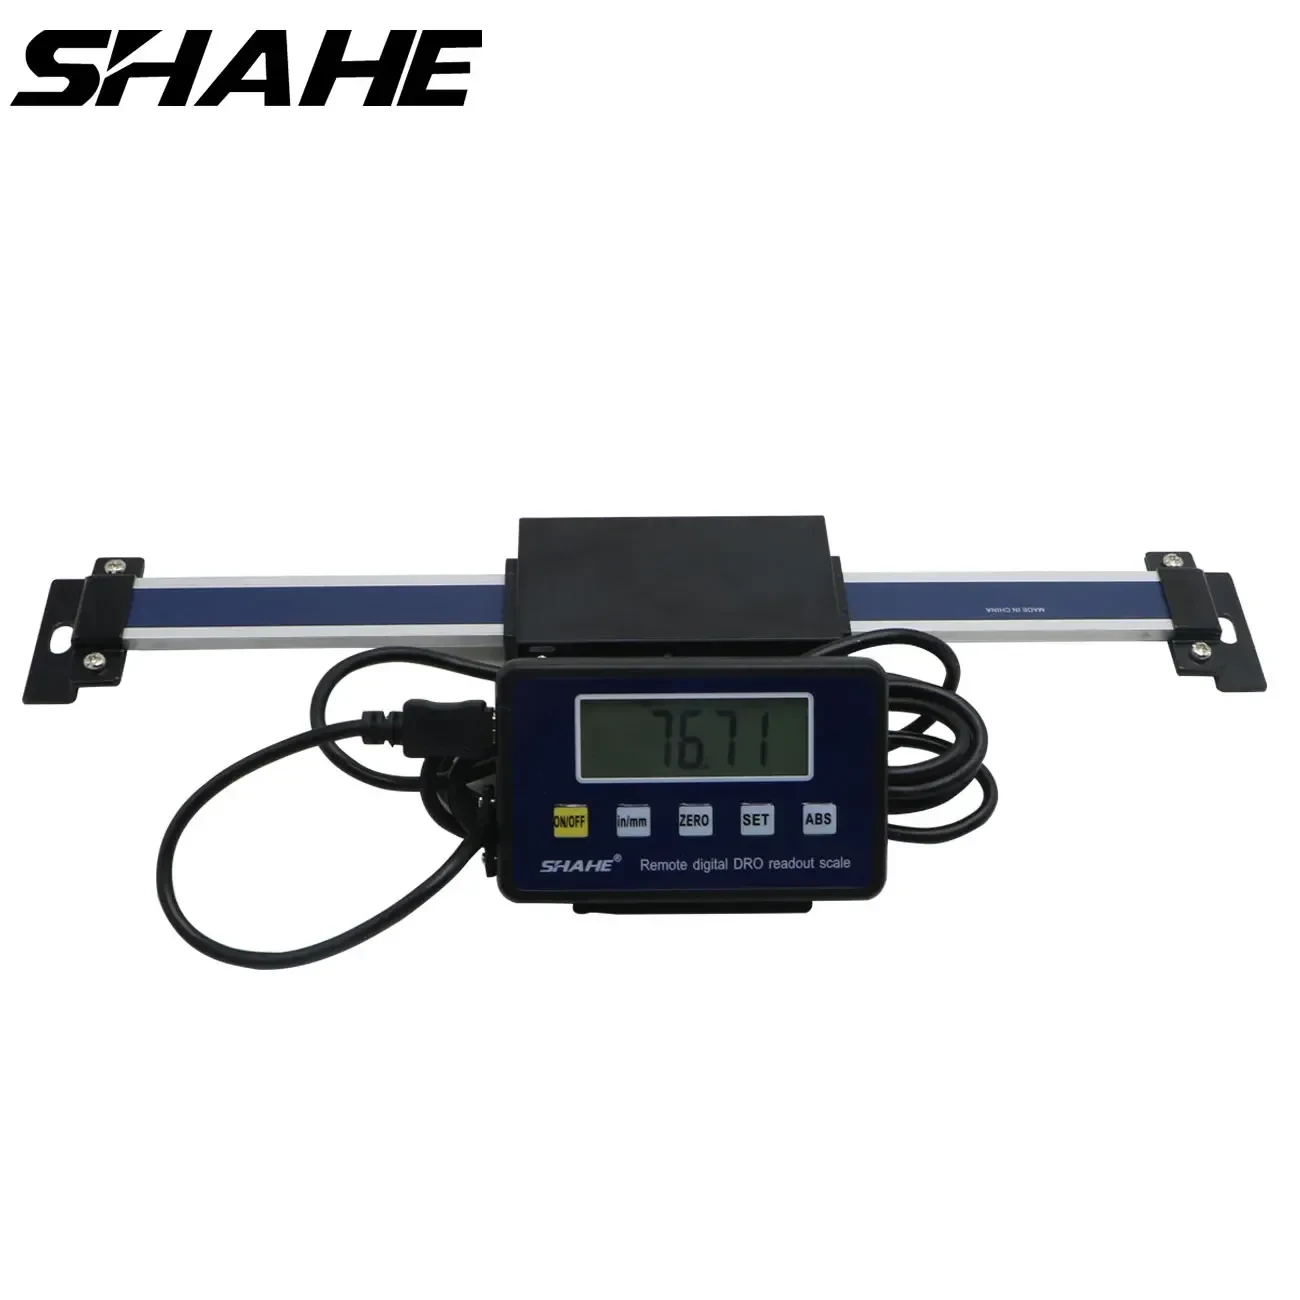 shahe 0-150mm/0-200mm/0-300mm Digital Table Readout linear scale DRO Magnetic Remote External Display  for Bridgeport Mill Lathe